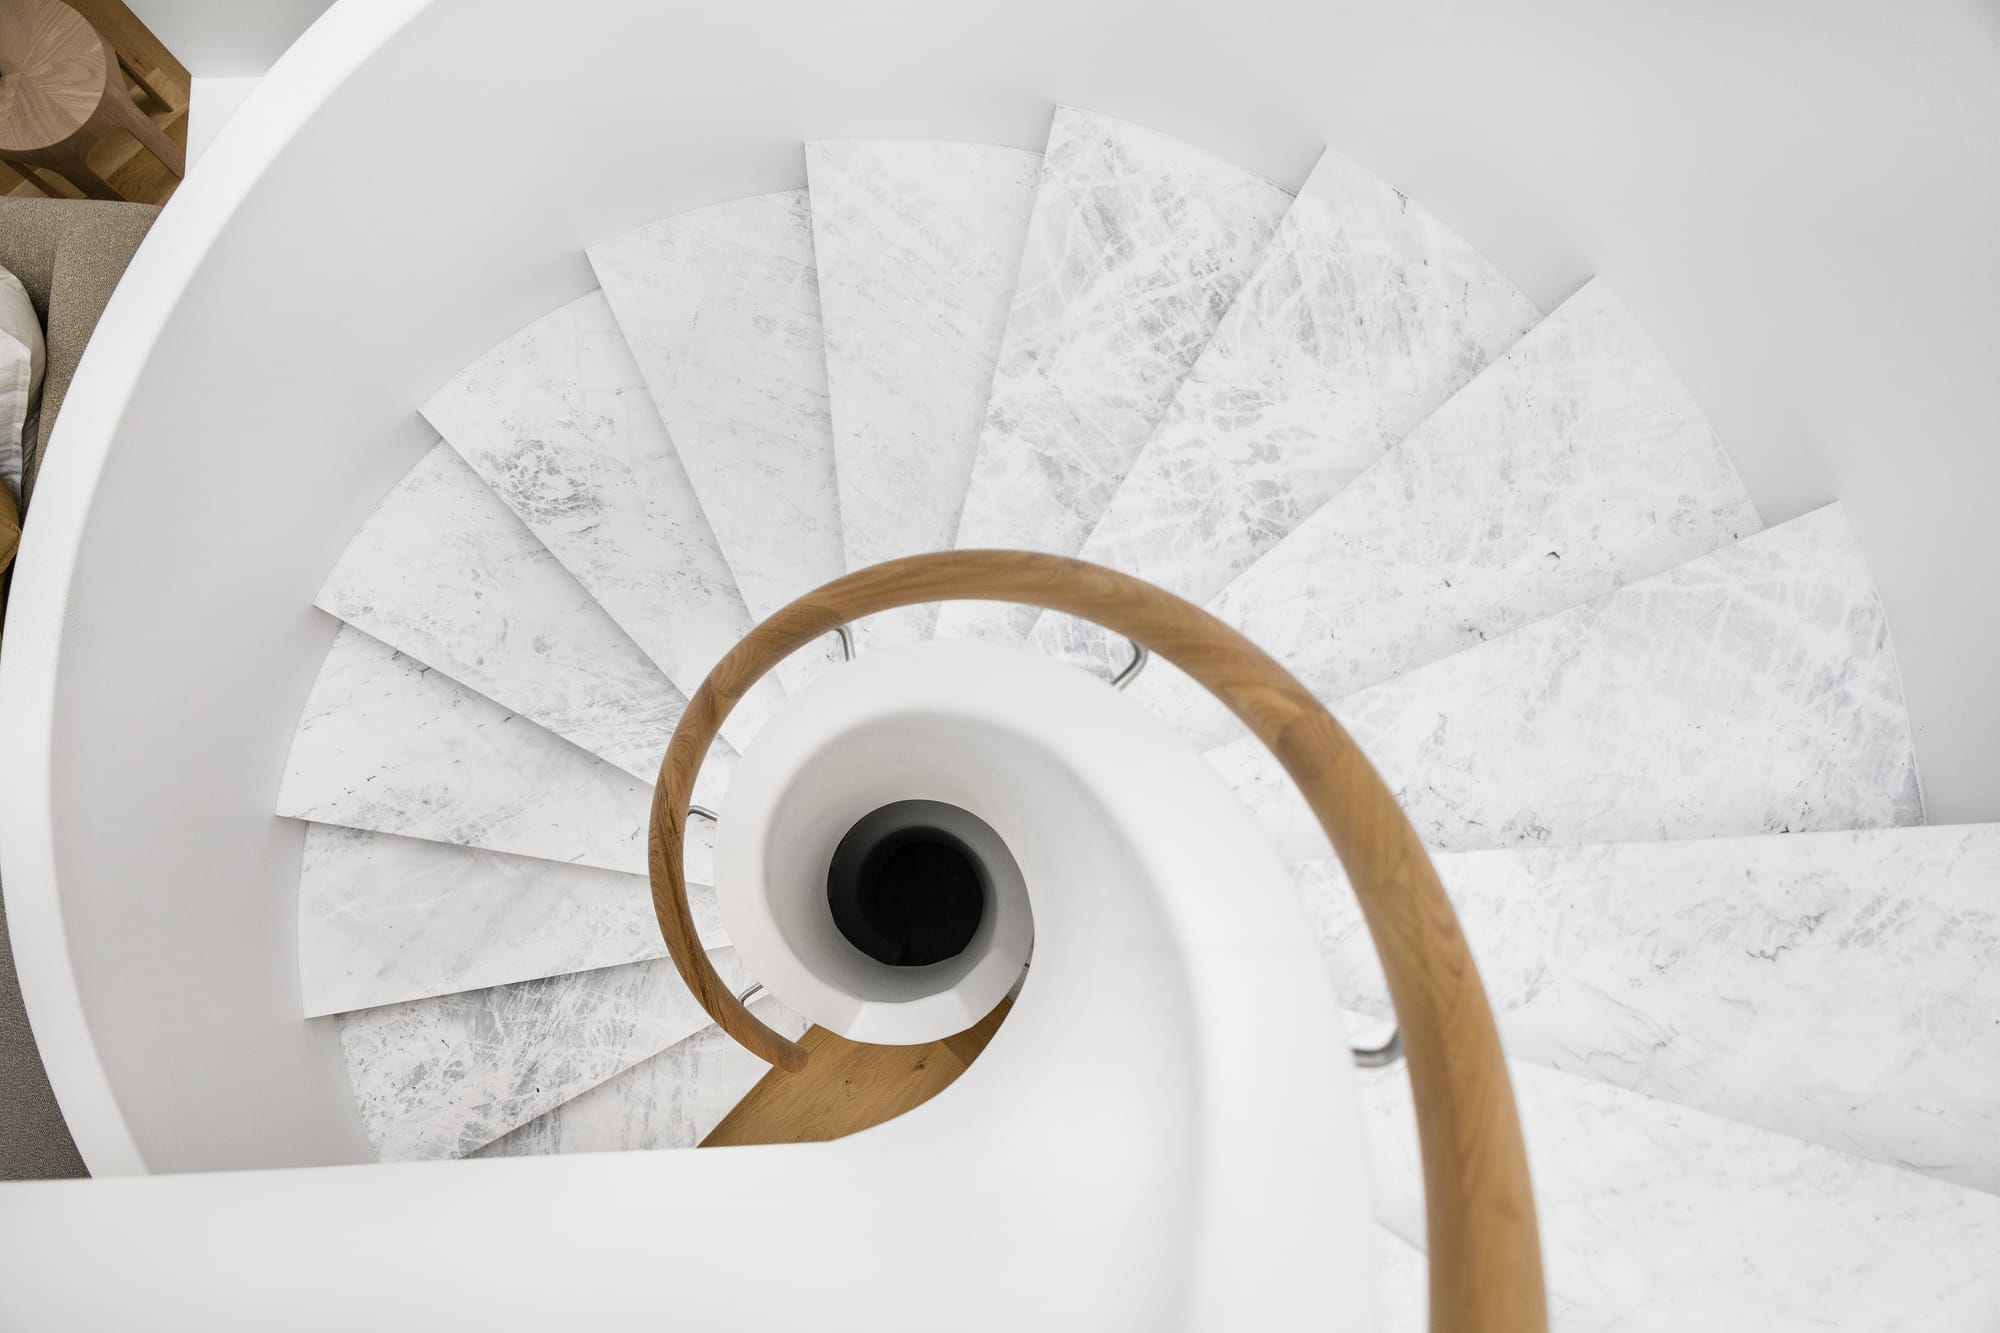 The Grove by Taouk Architects.An elegant view from the top of a white spiral staircase with a classic design, accentuated by a dark brown handrail that contrasts with the pristine white steps. The photo captures the graceful curve of the stairs as they descend, emphasizing the architectural beauty and simplicity of the design.